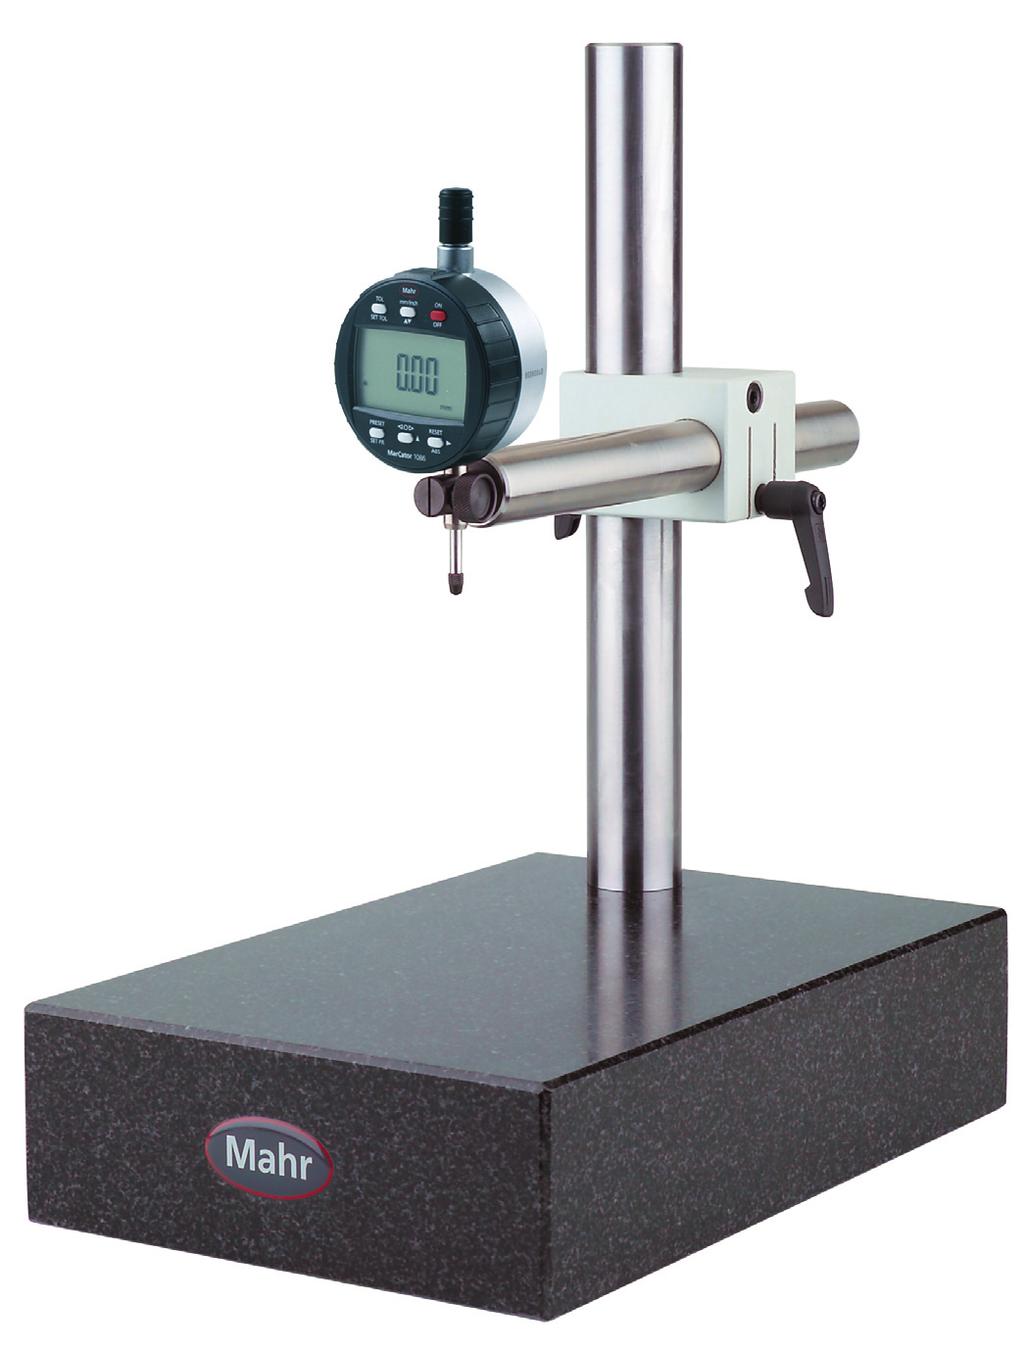 - 8-10 Large Comparator Stands 821 Extremely sturdy design Plate is made from lapped black granite Heavy duty post and adjustable support arm for maximum stability Support arm has a fall brake Fine